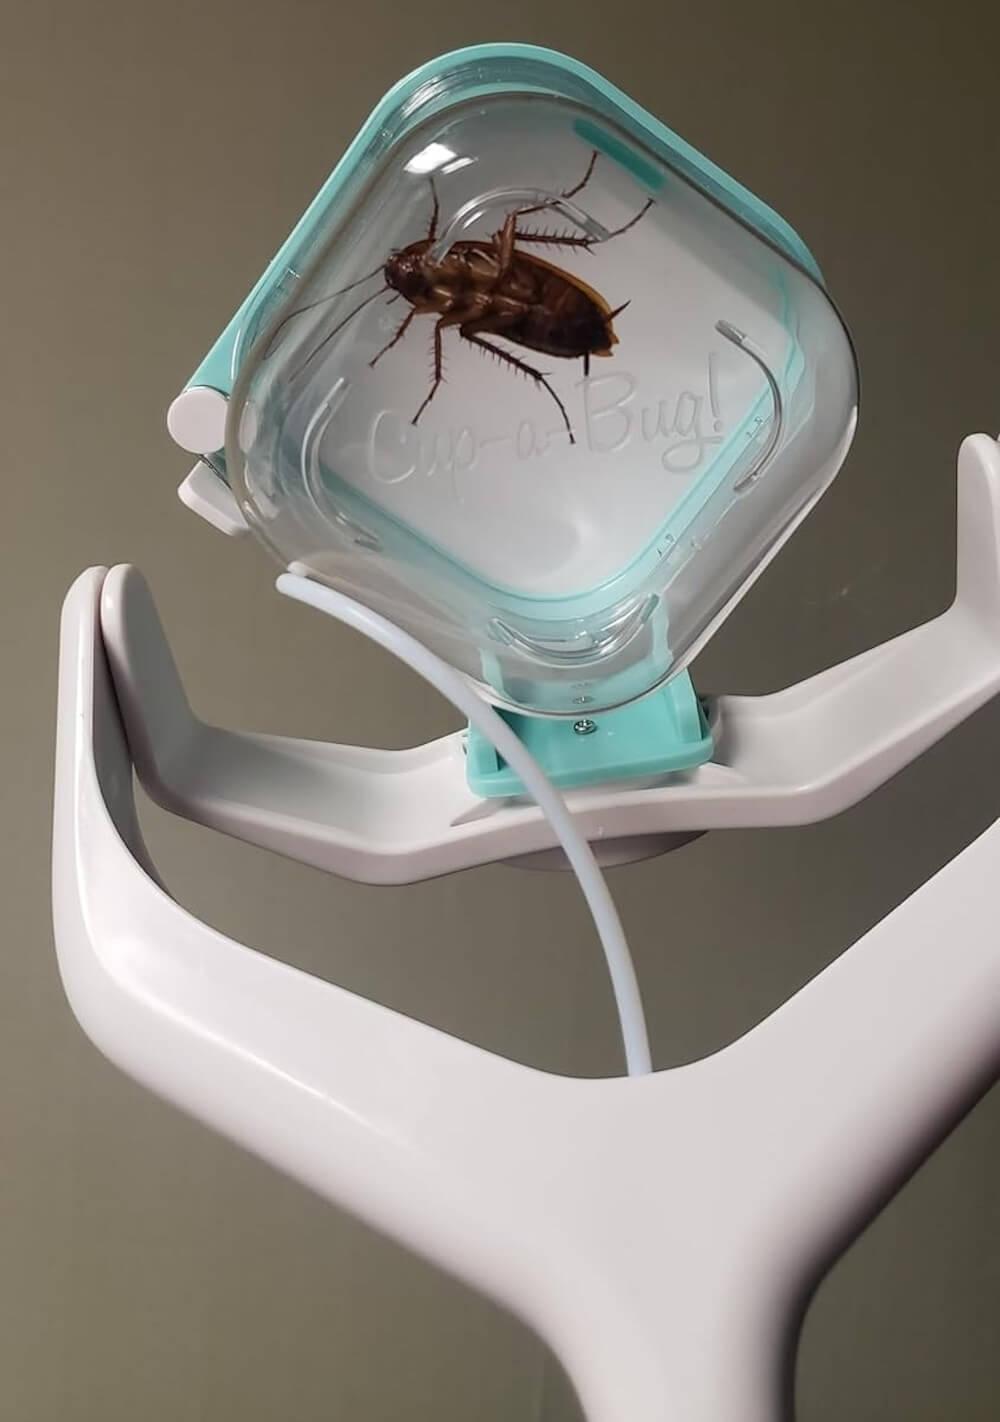 Cup-a-Bug Insect Catcher from Shark Tank Season 15